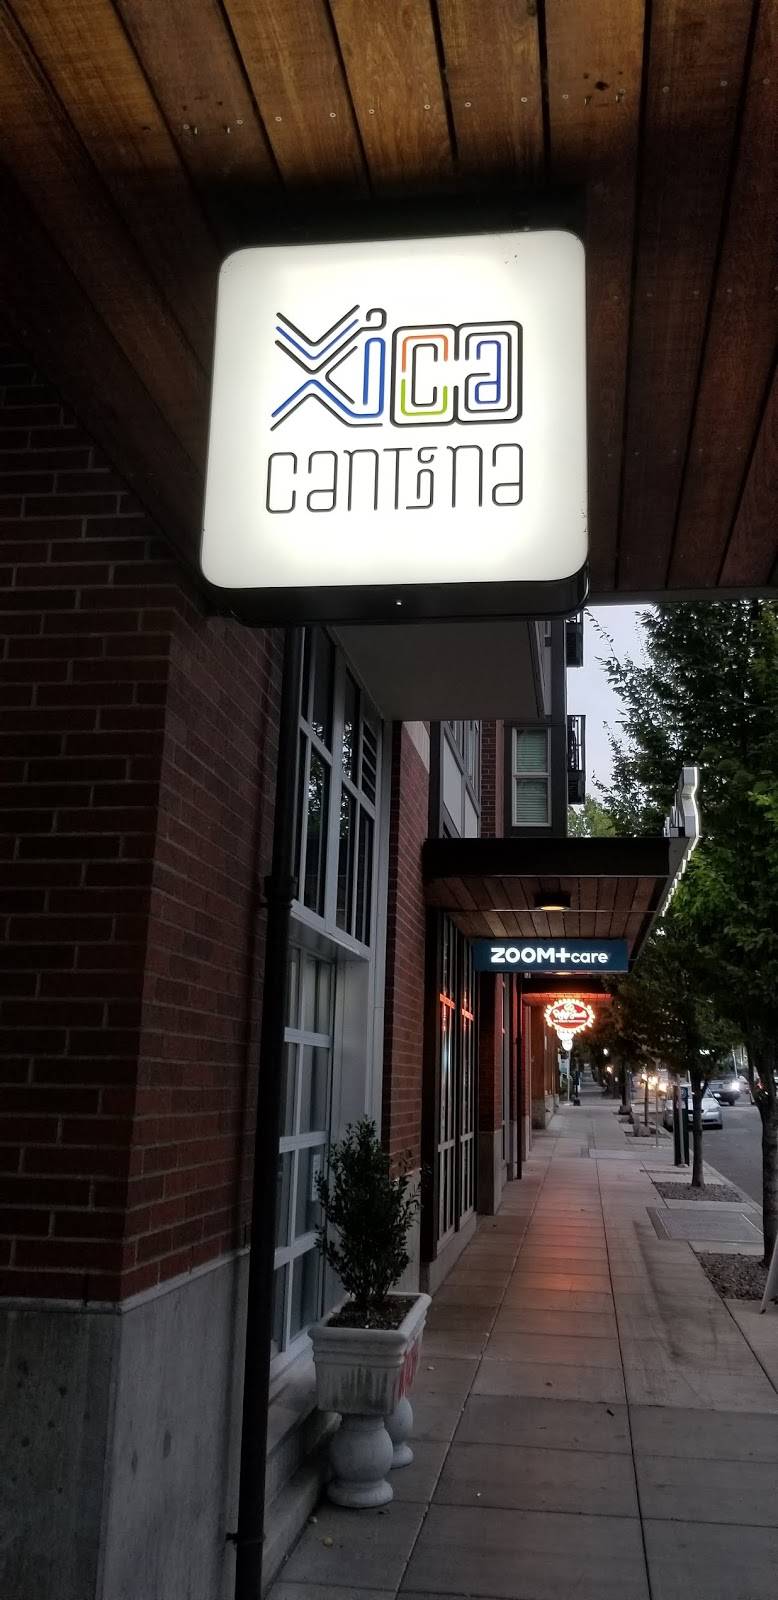 Cantina Xica | restaurant | 1668 NW 23rd Ave, Portland, OR 97210, USA | 9713399041 OR +1 971-339-9041